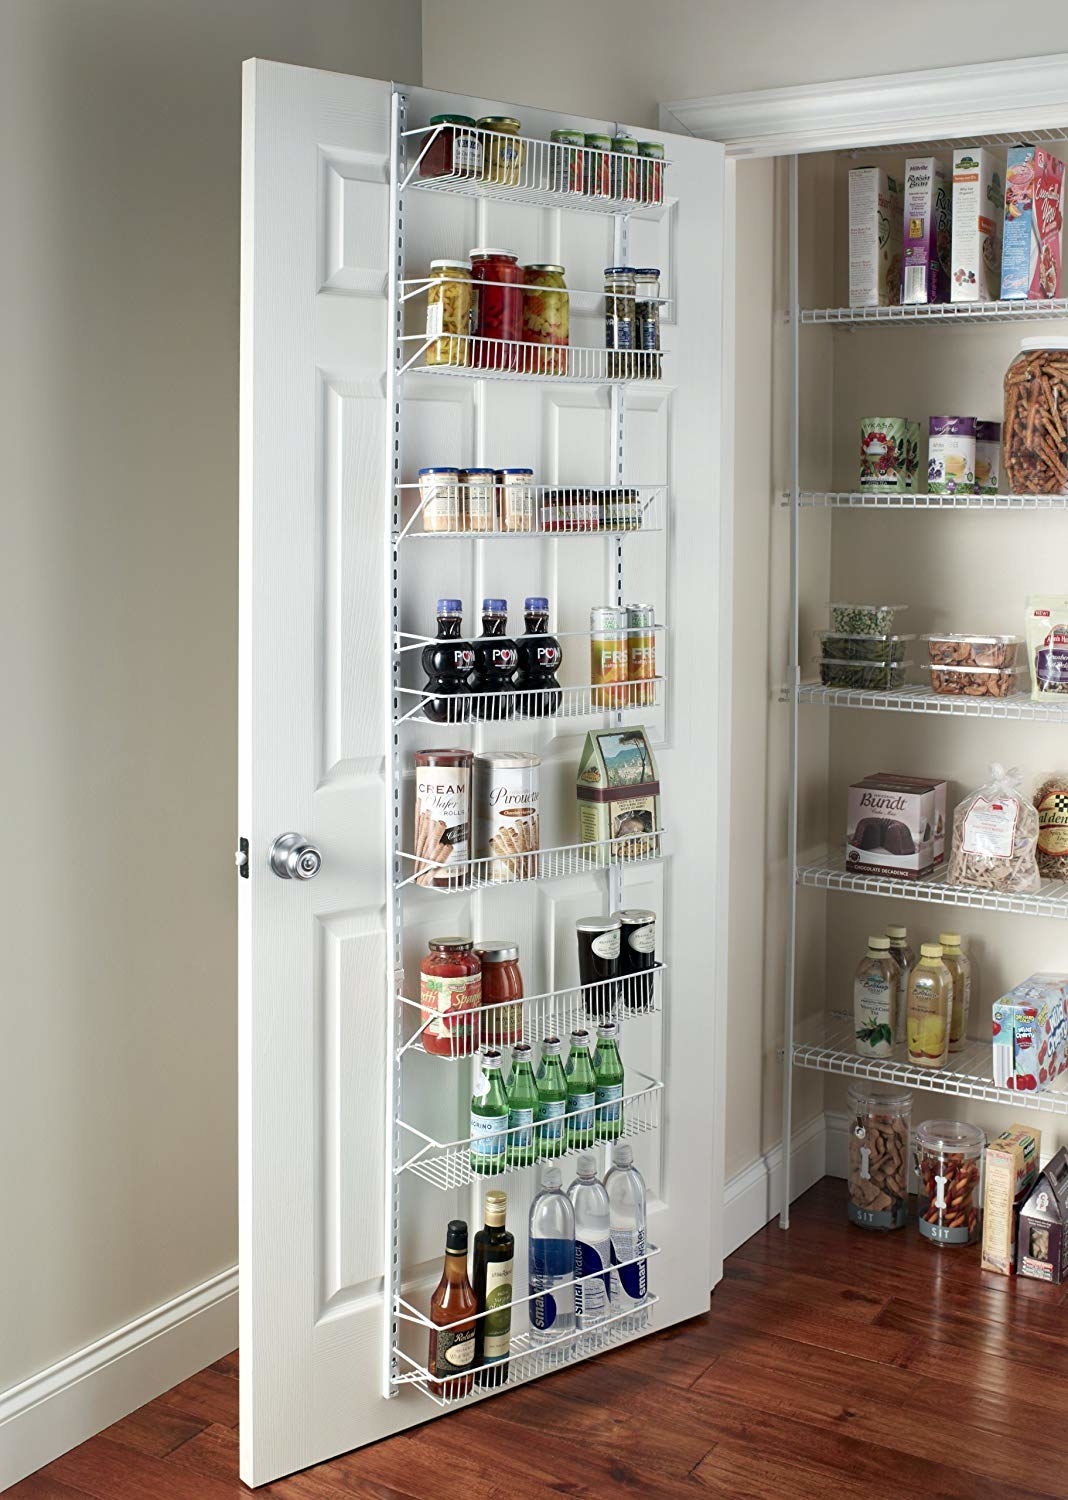 The ultimate guide to stocking up (and organizing) your kitchen